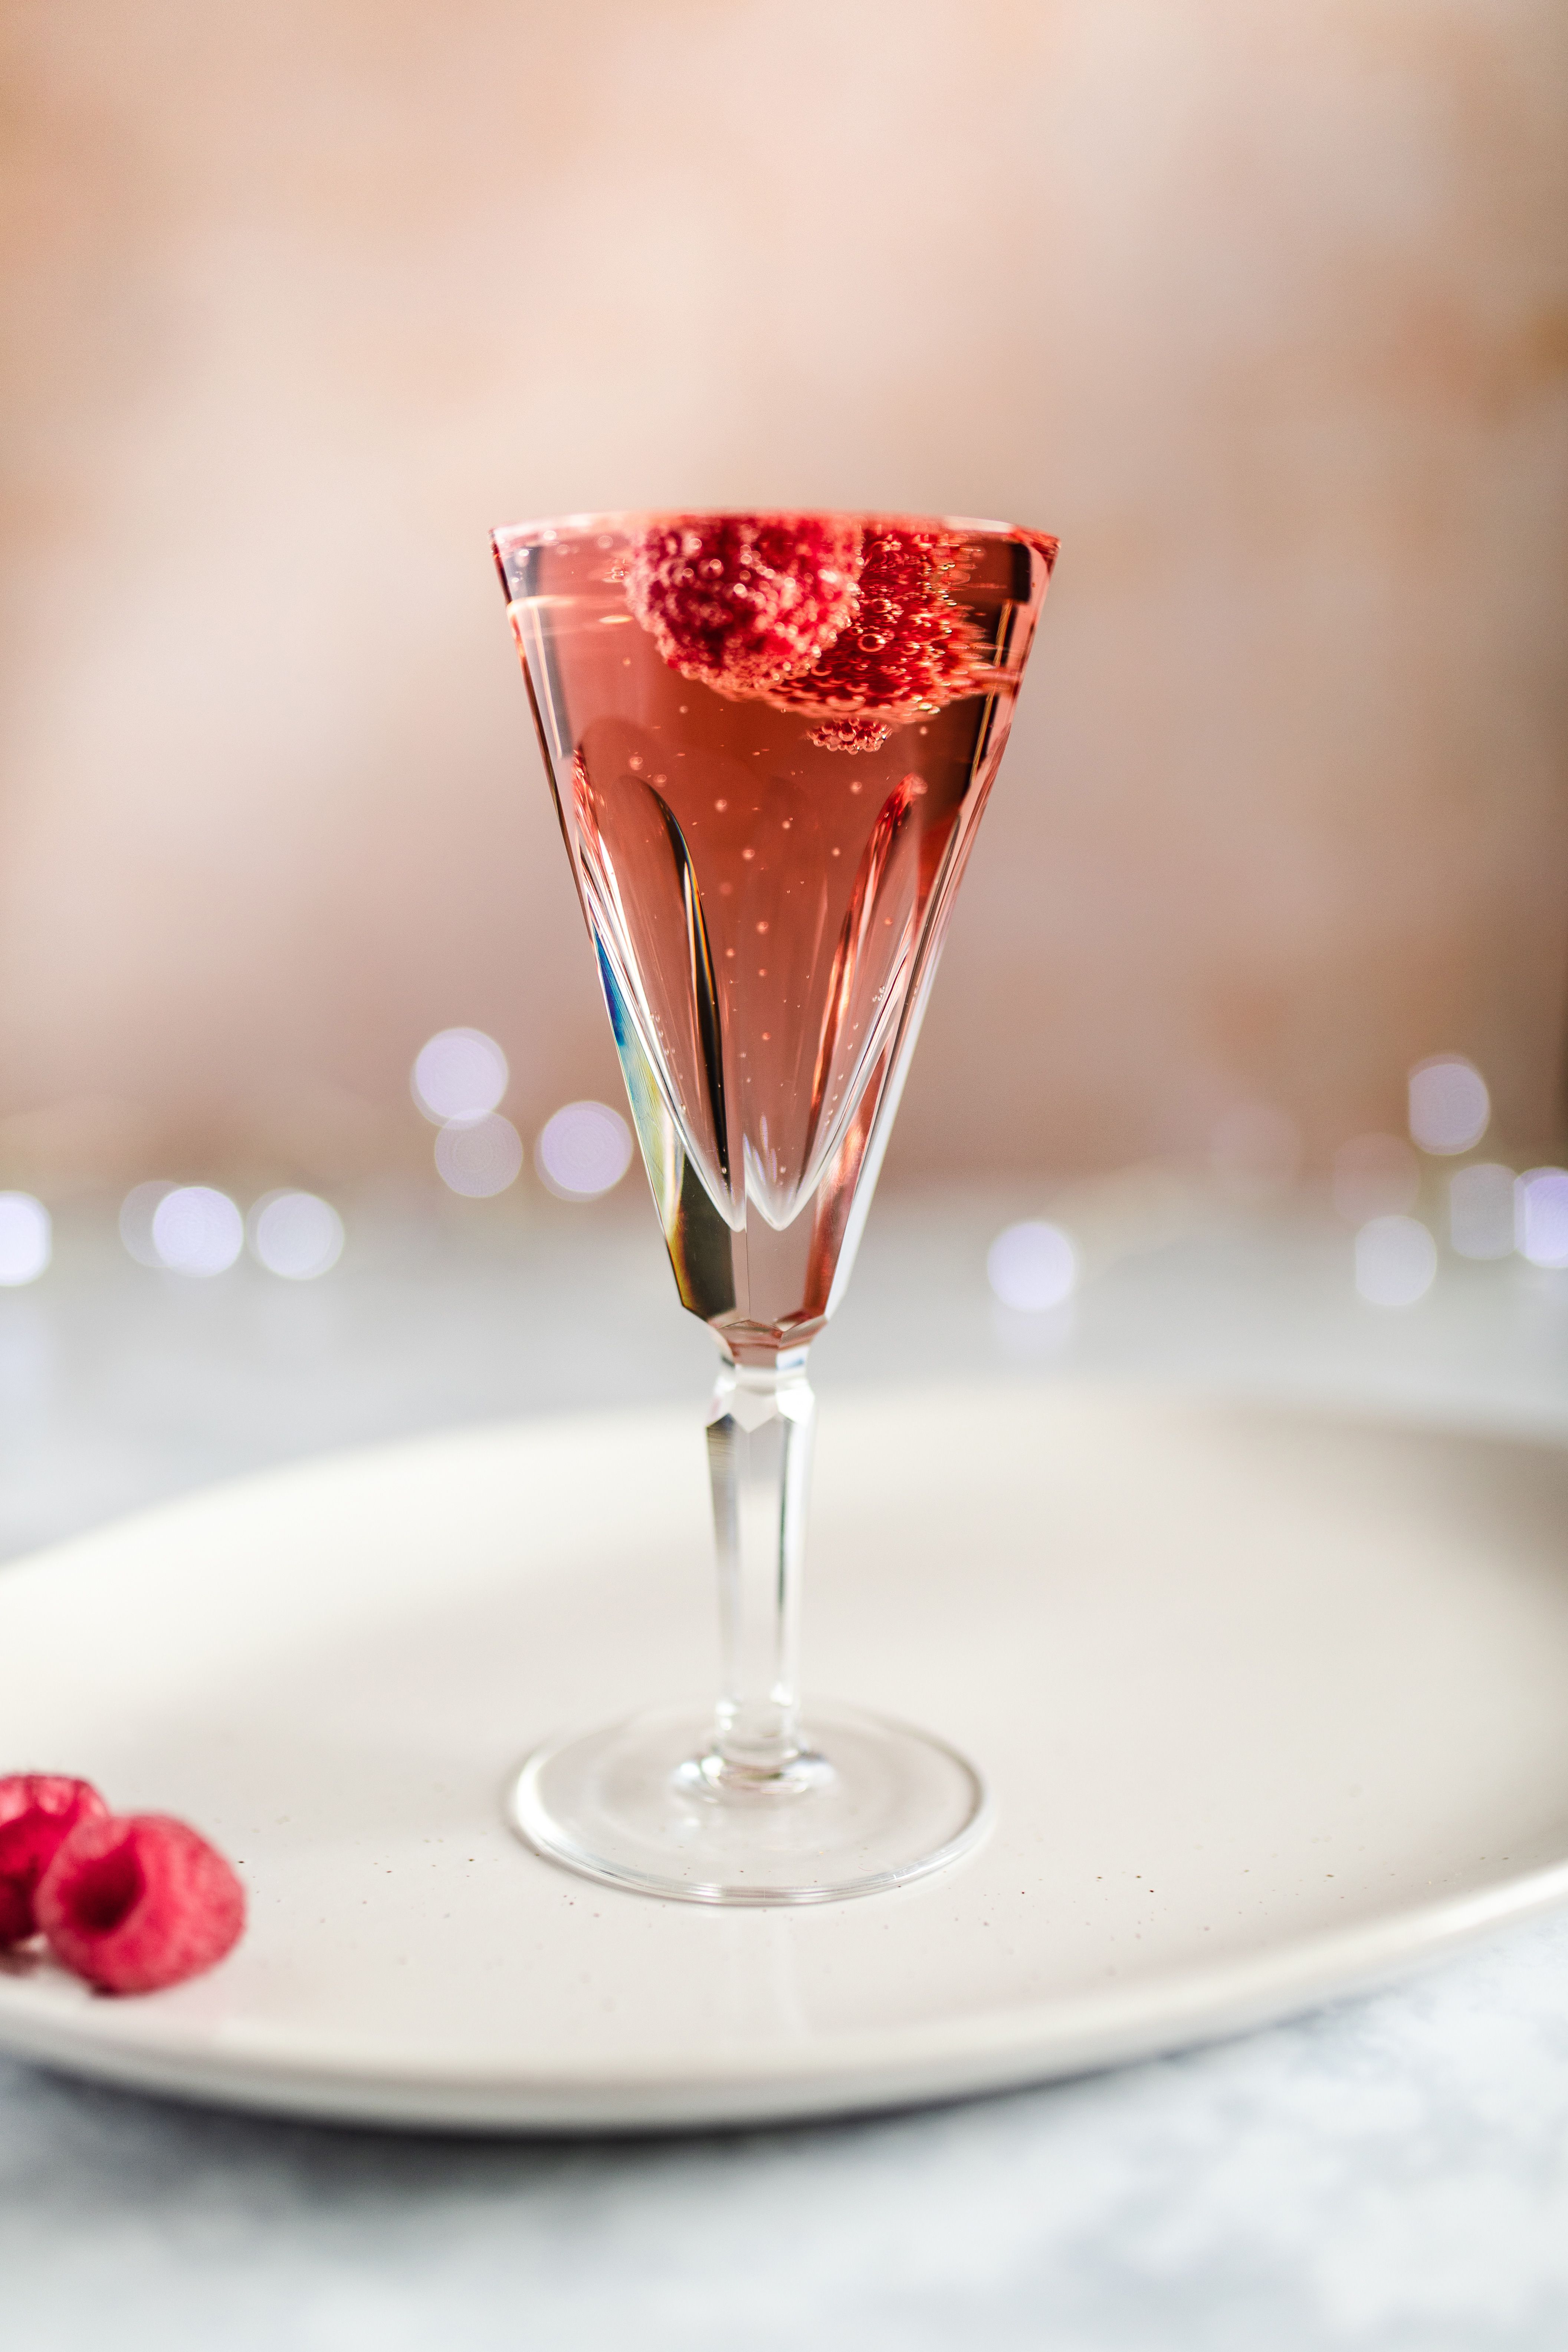 Champagne And Chambord Cocktail Recipe,Amazon Parrots In The Wild